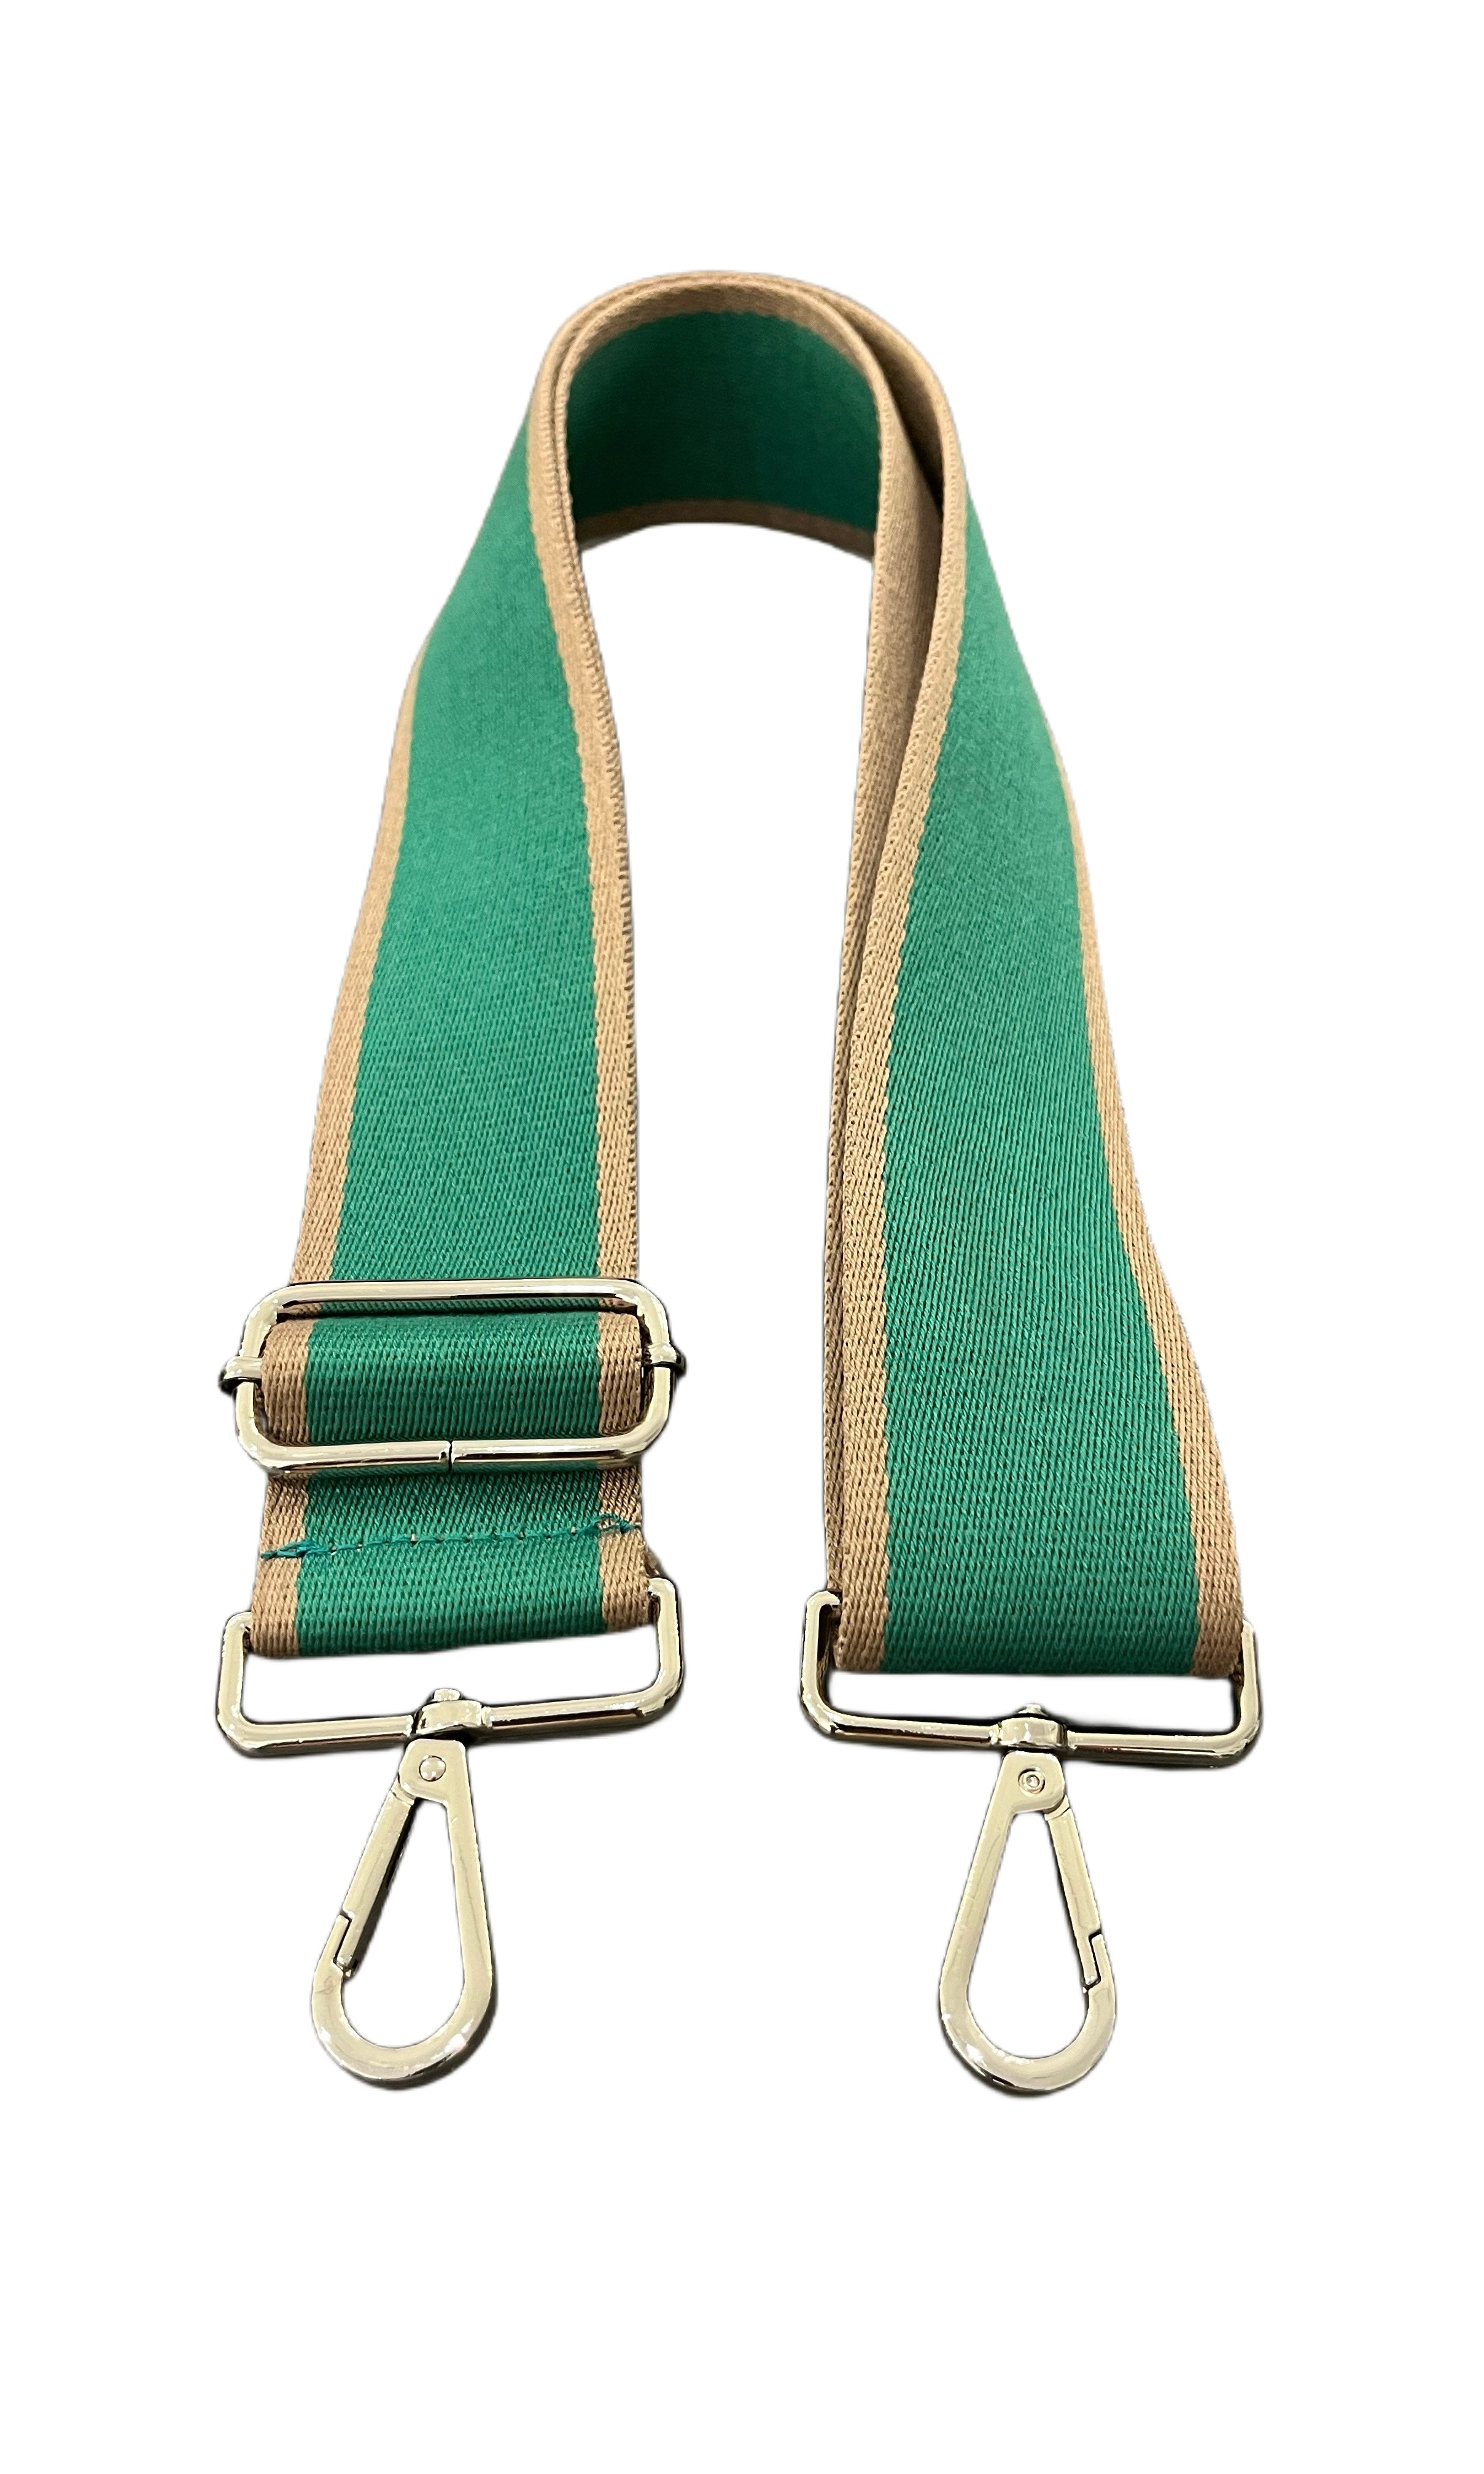 Bodinna solid bag straps- made in italy